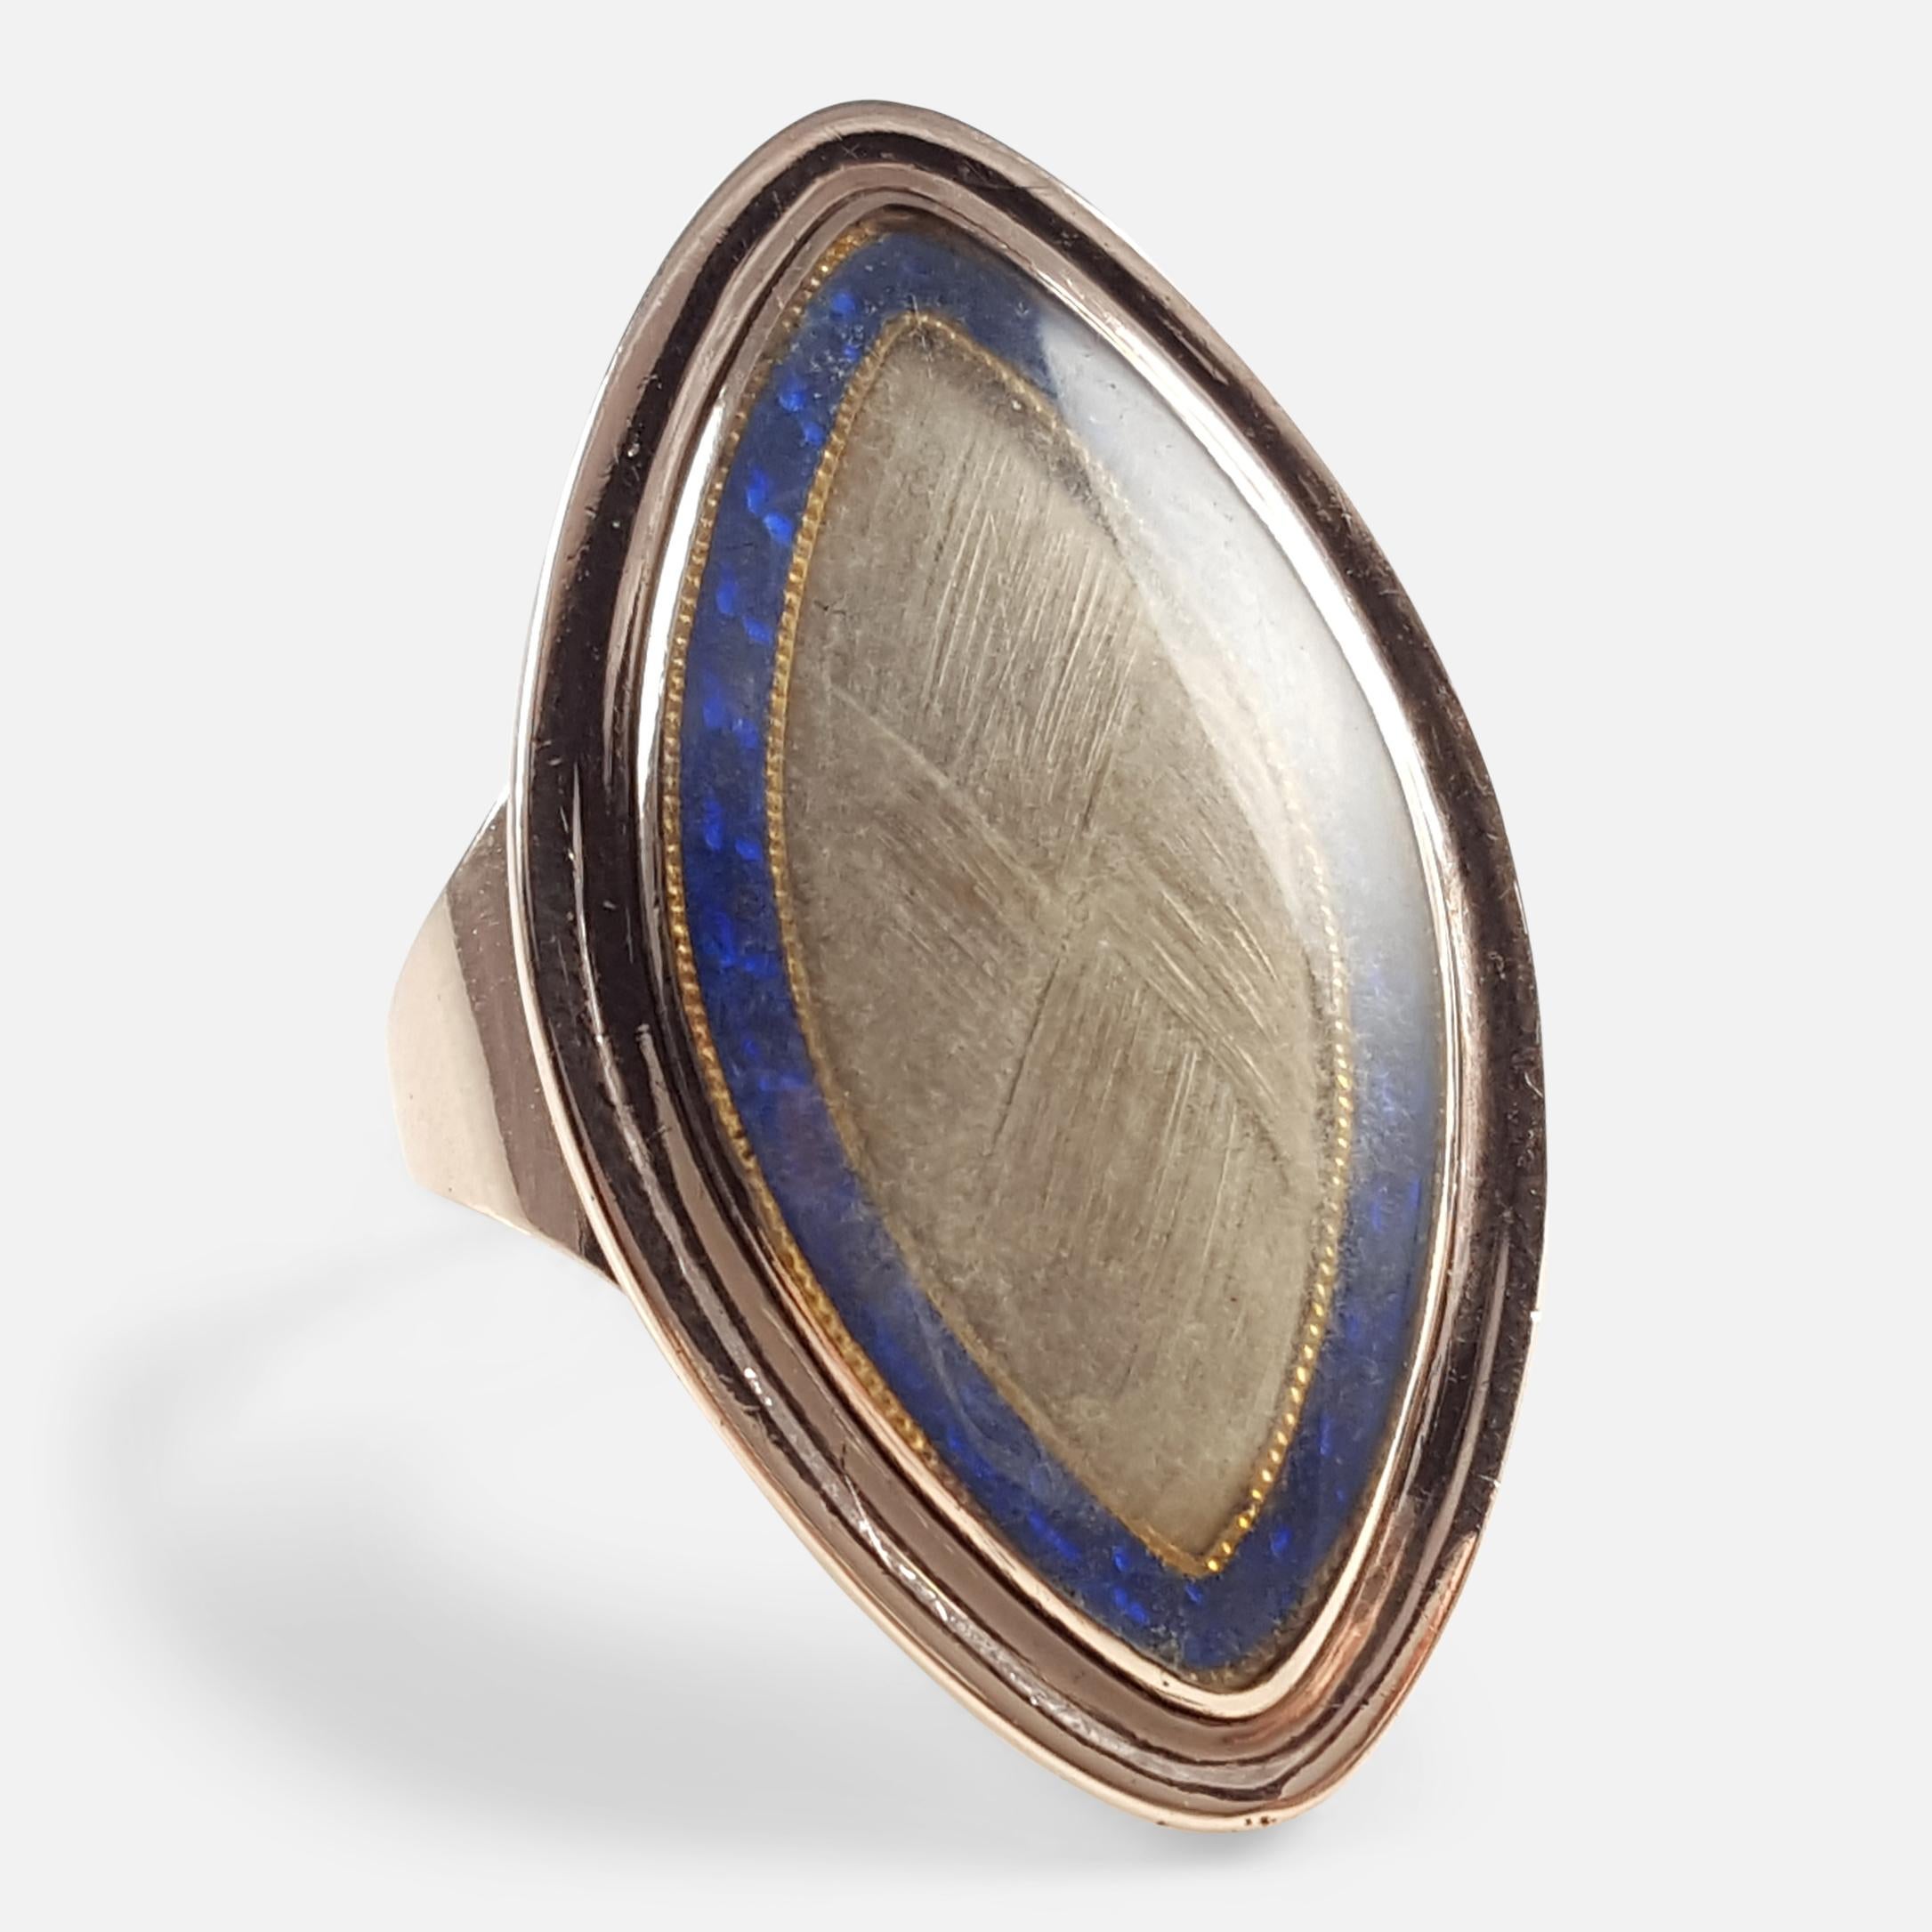 An antique Georgian 9k mellow rose gold glazed hair panel & blue enamel mourning ring circa 1800. The ring is set to the front with a glazed panel containing a woven hair lock surrounded by a blue enamel border to a closed back setting.  As was